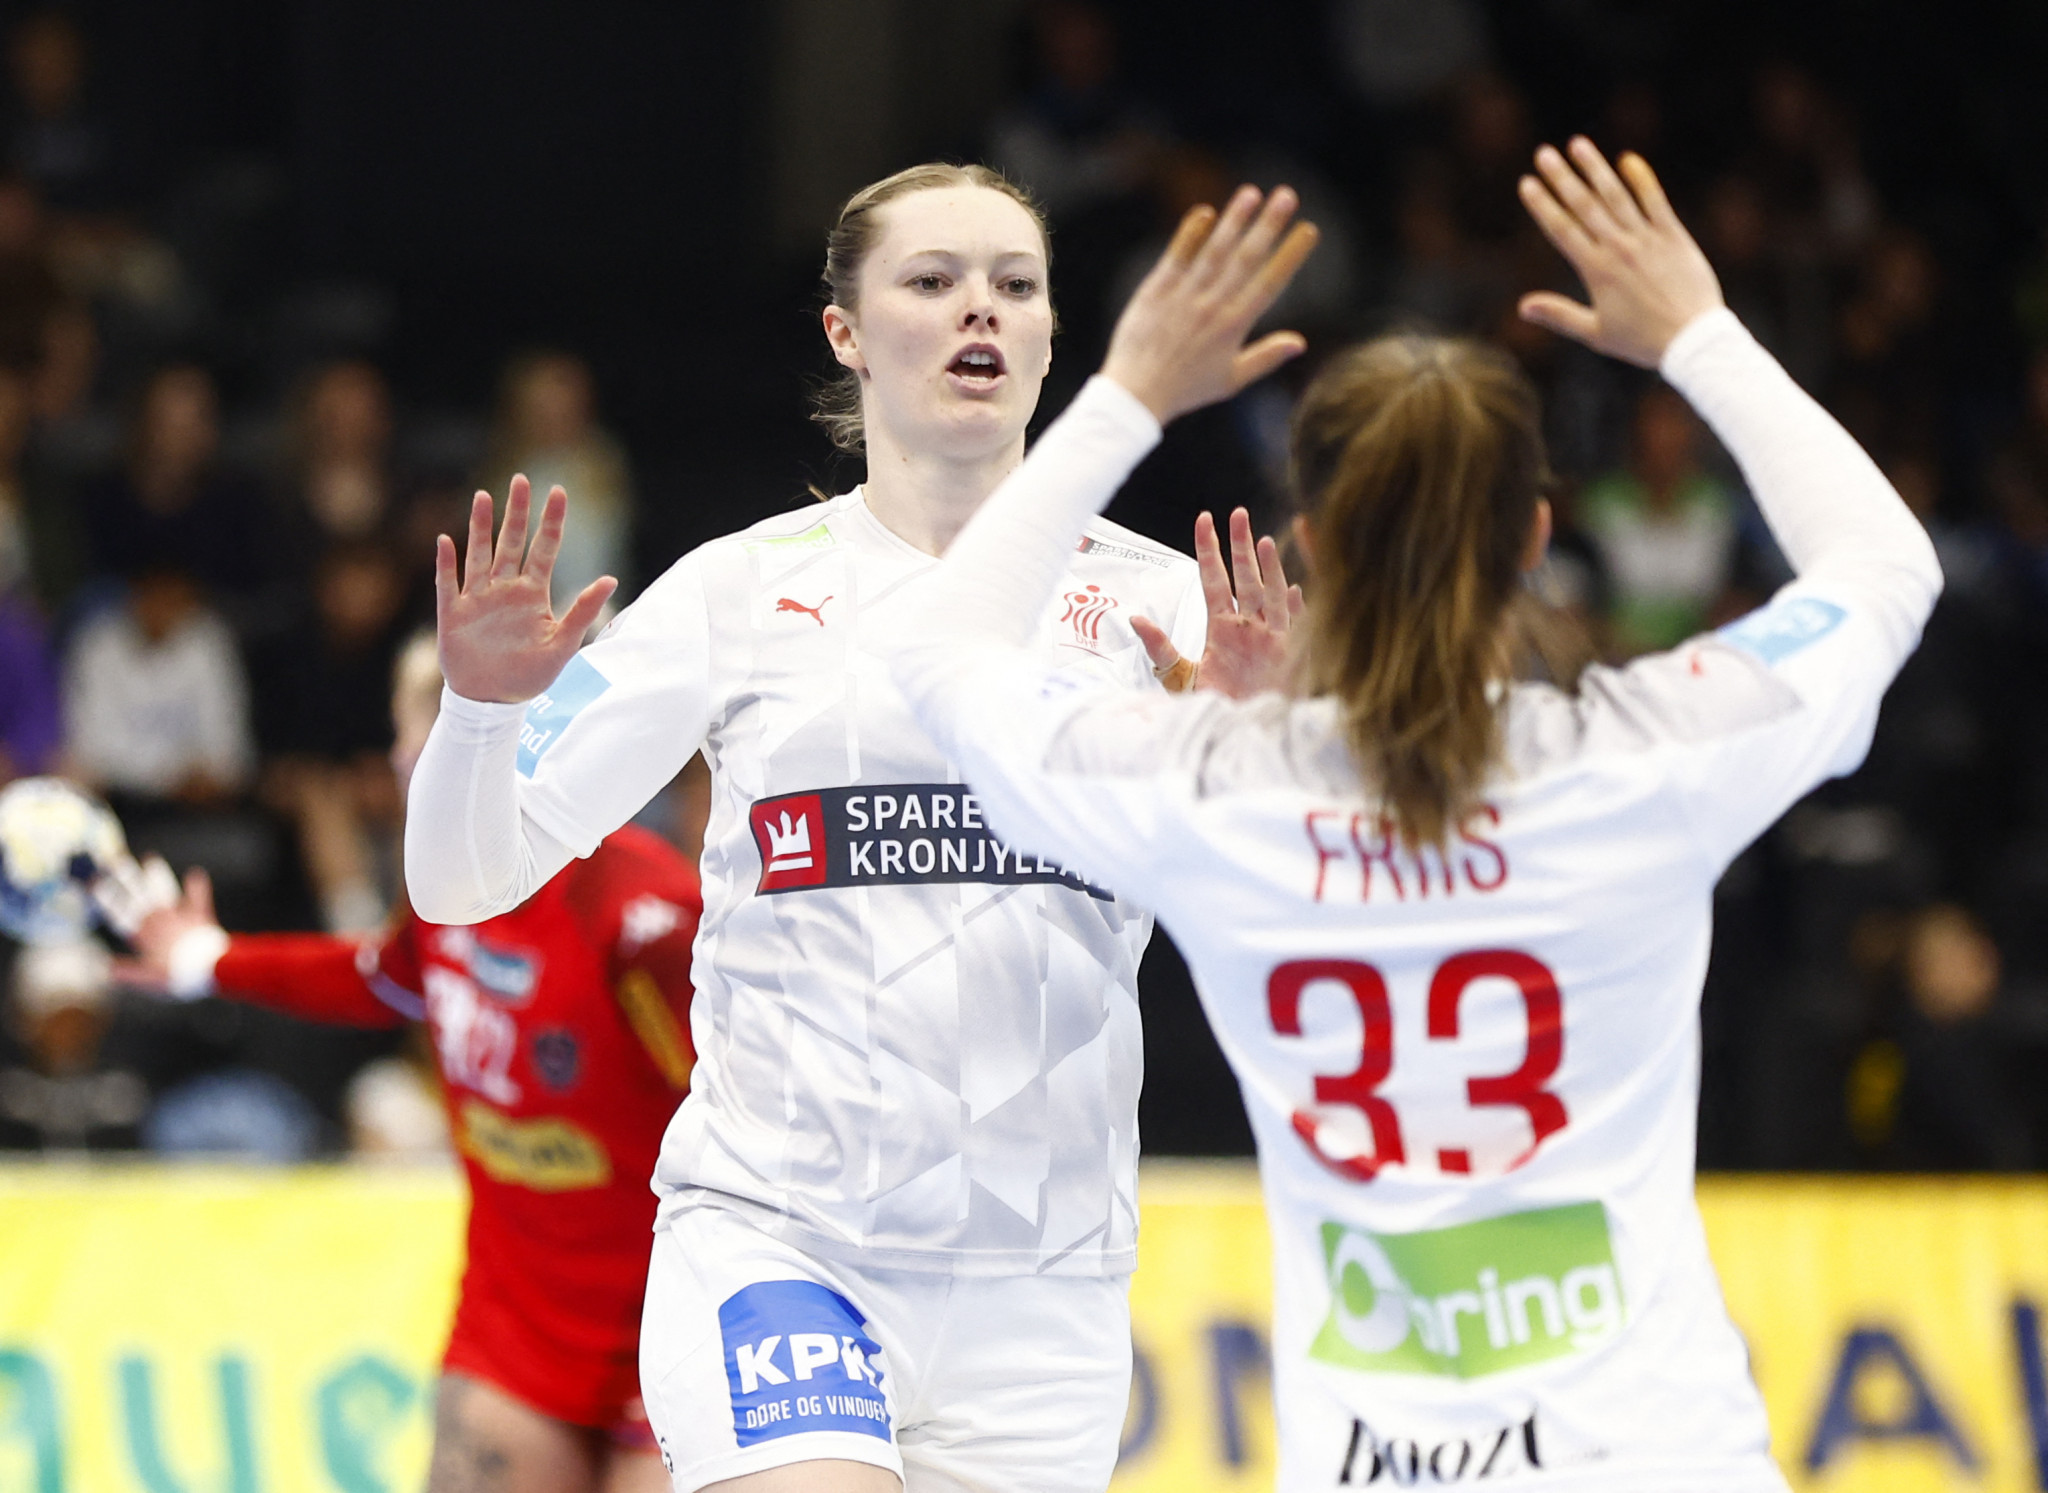 Denmark are one of three teams hosting the Women's Handball World Championship, along with Norway and Sweden ©Getty Images